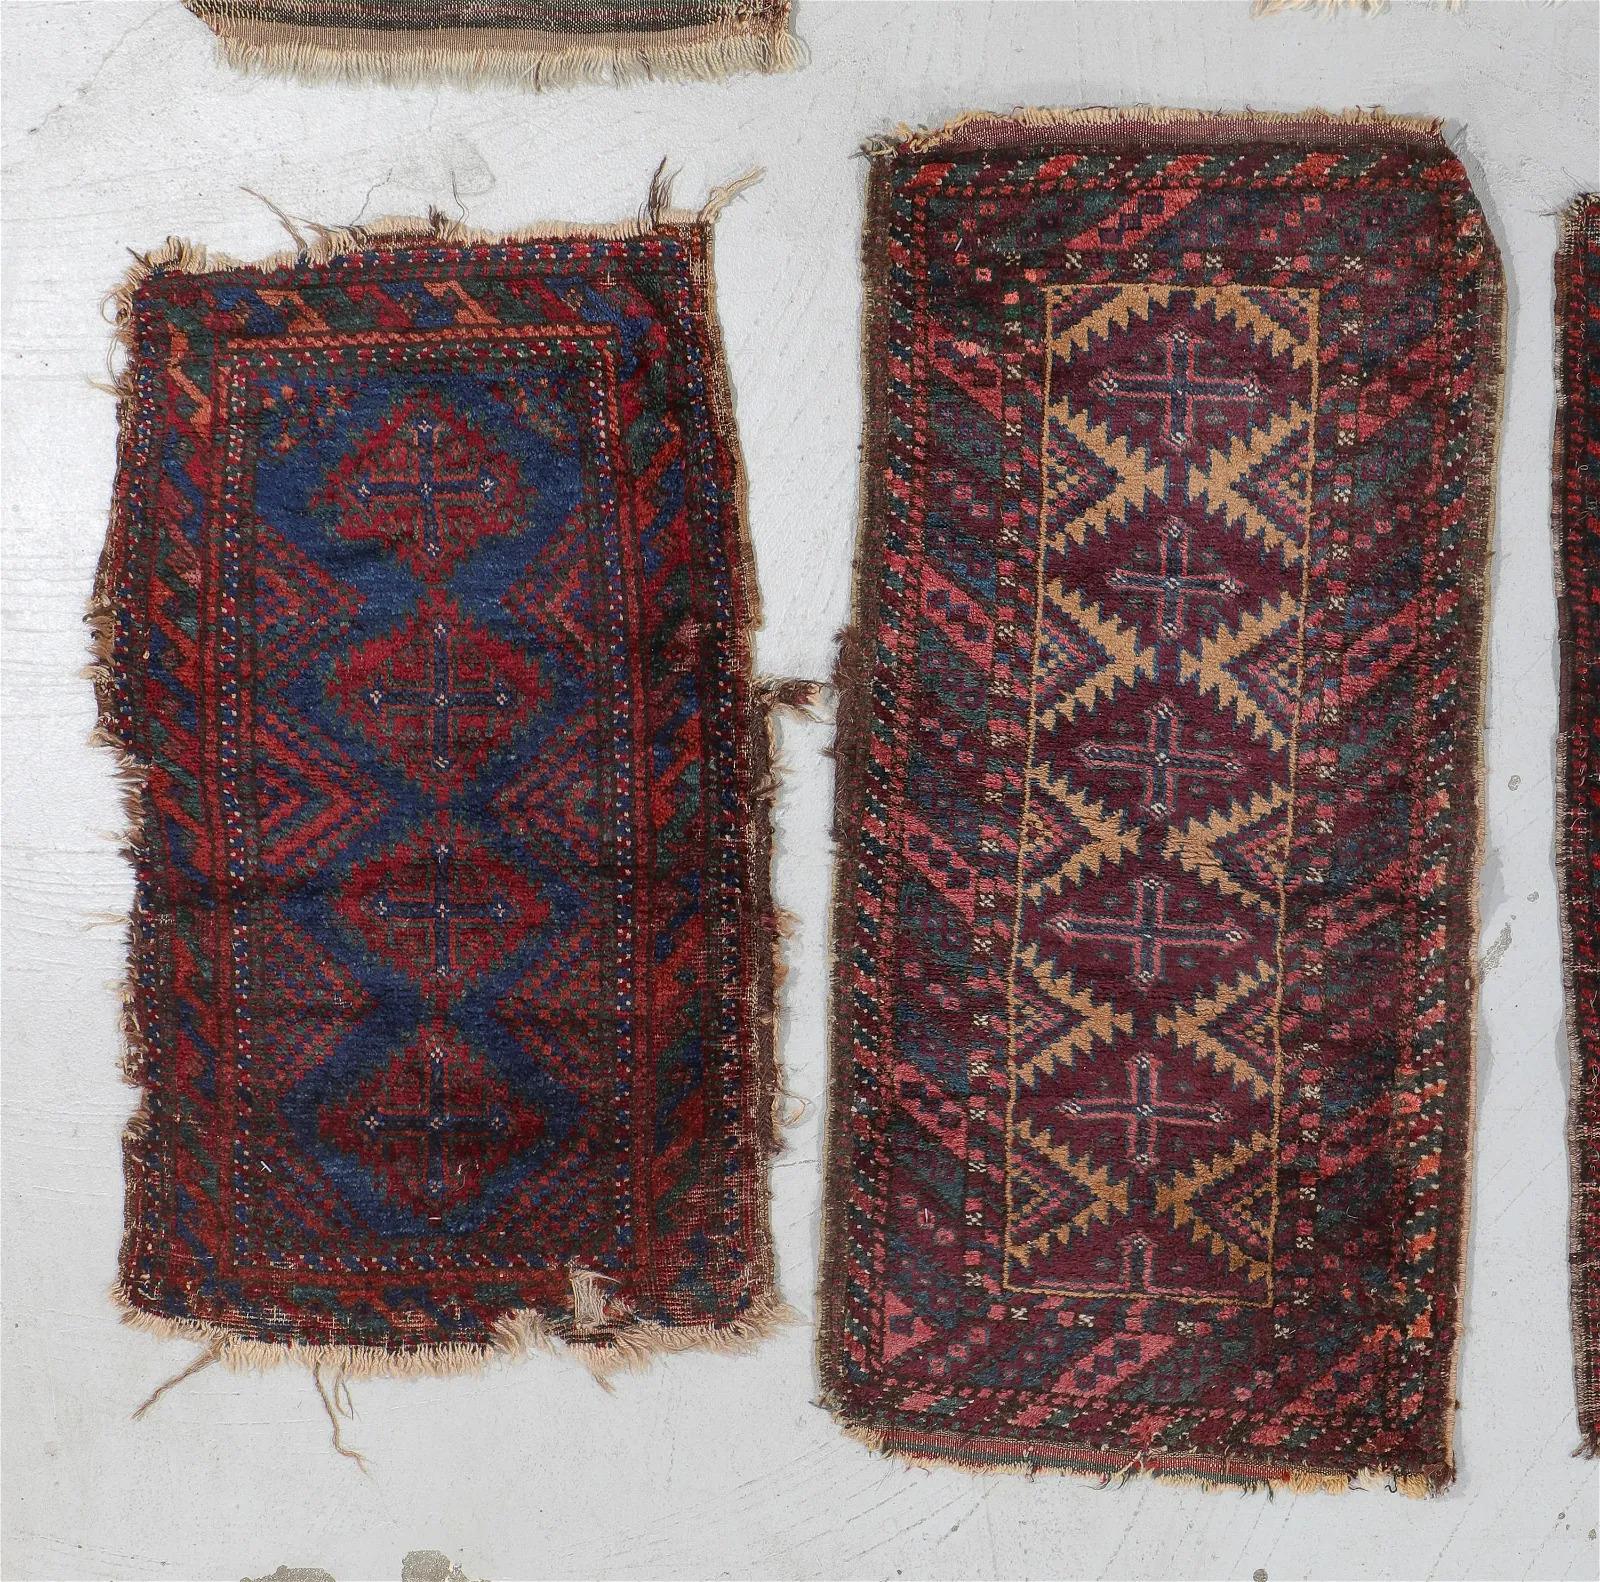 Wool Lot of 9 Antique Afghan Baluch Collectible Rugs 1.6' x 3.2', 1870s - 2B29 For Sale